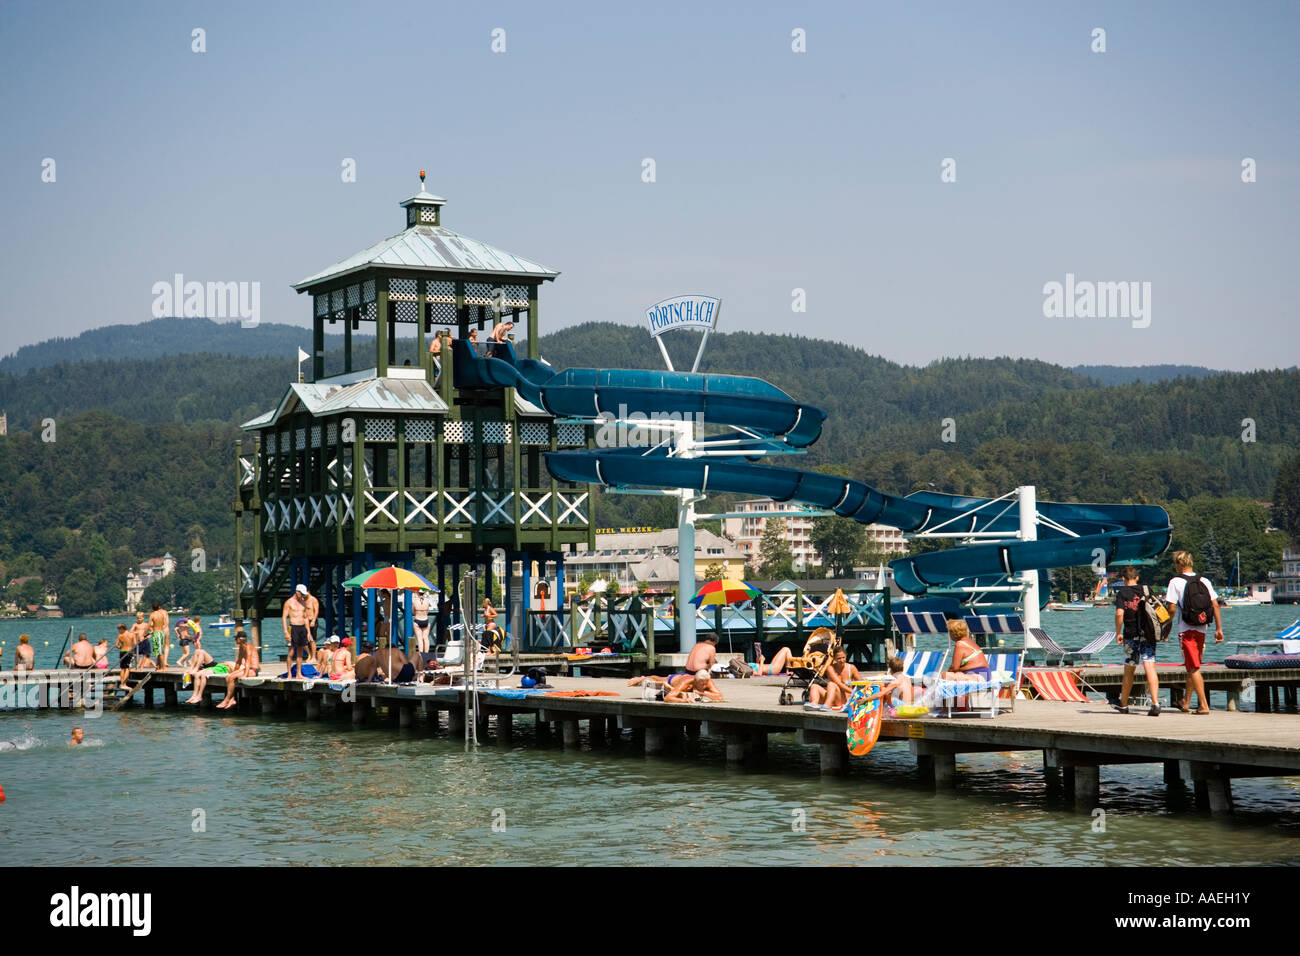 People relaxing in the Promenadenbad Portschach Worthersee biggest lake of Carinthia Carinthia Austria Stock Photo